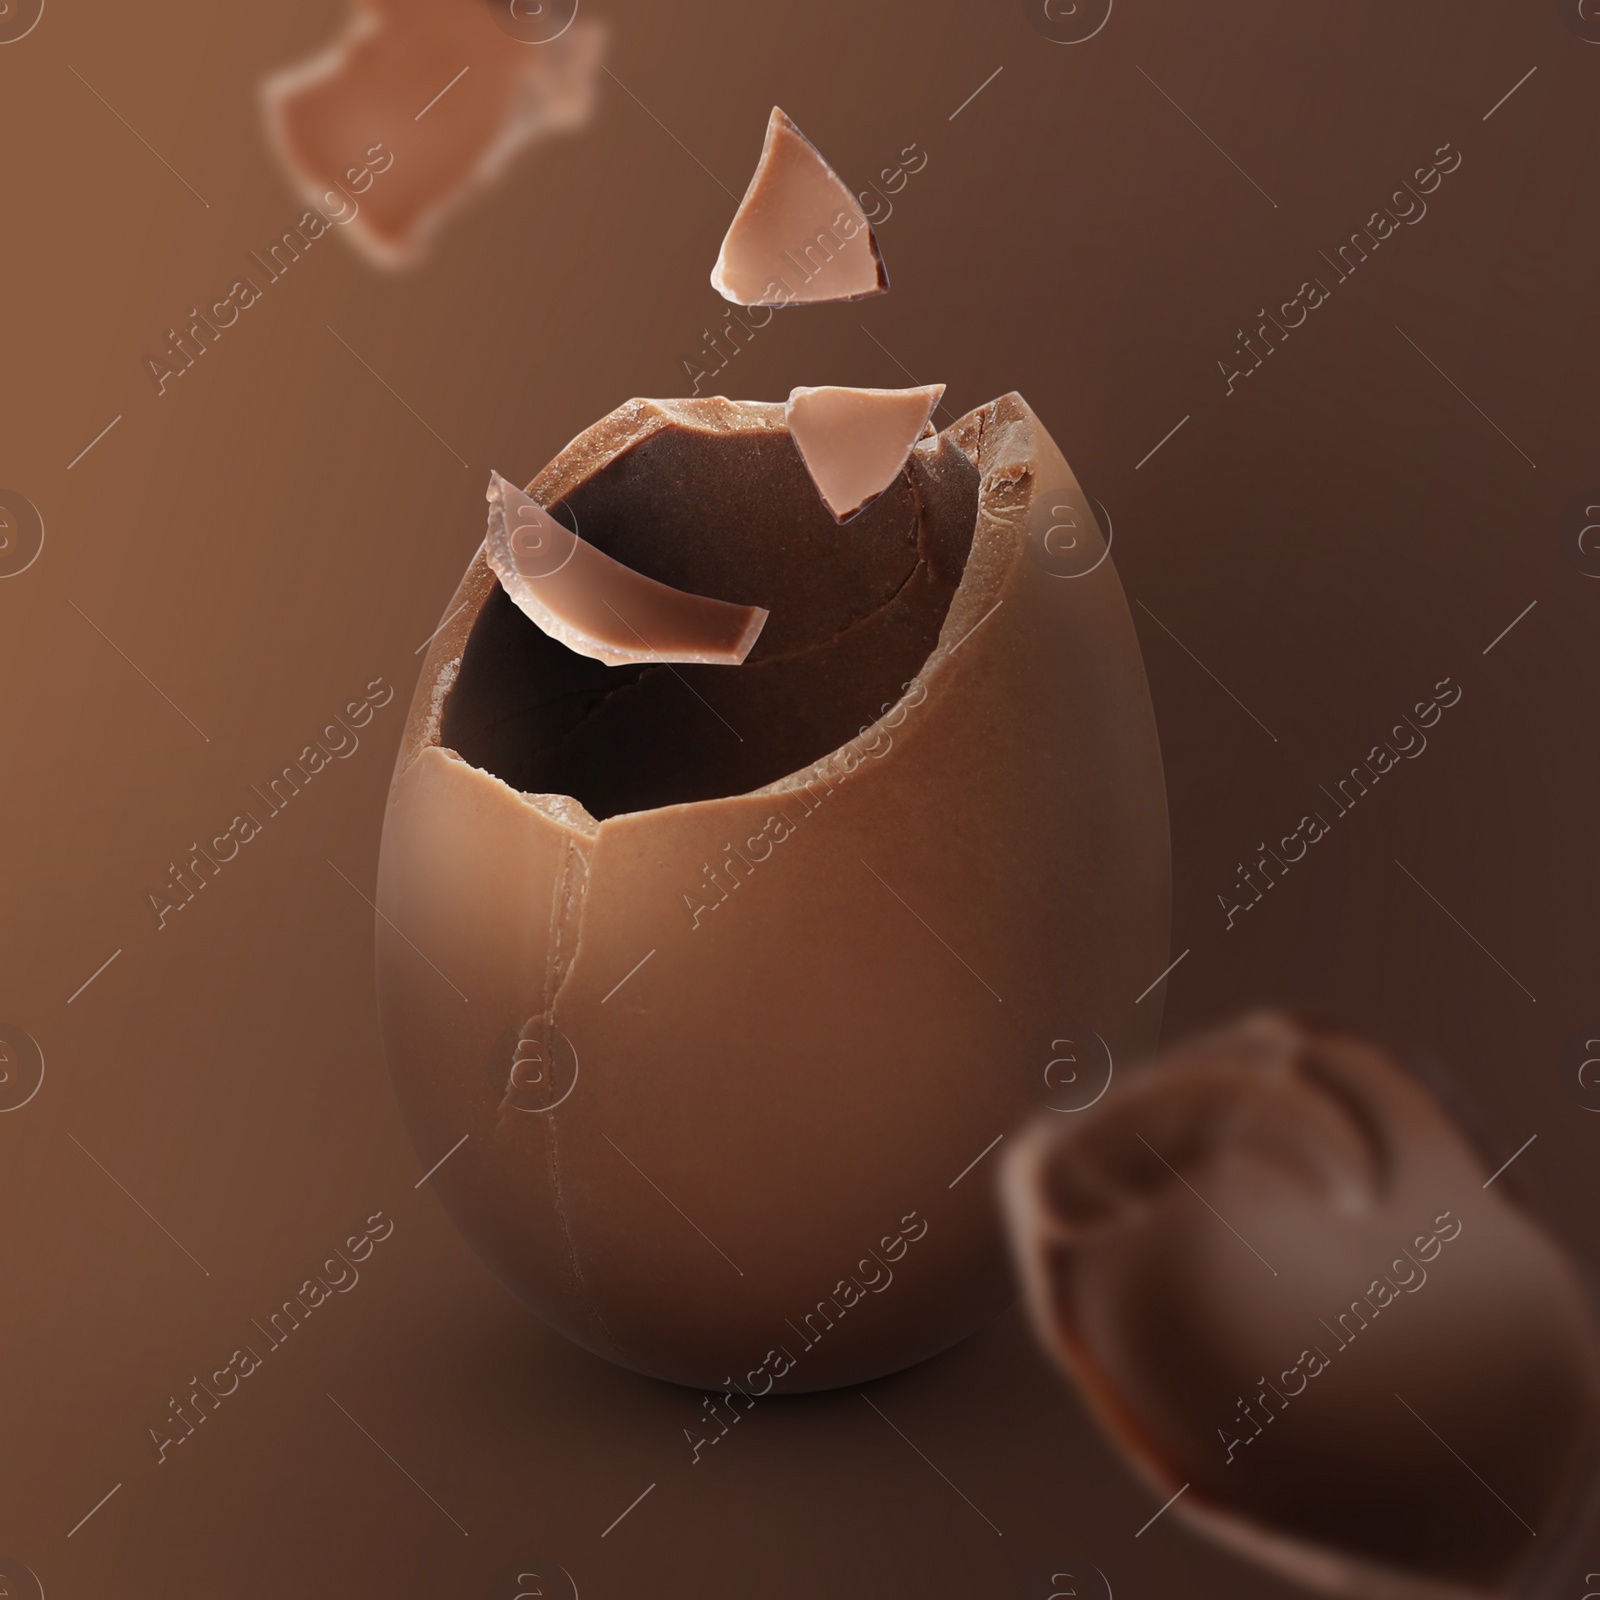 Image of Exploded milk chocolate egg on brown background